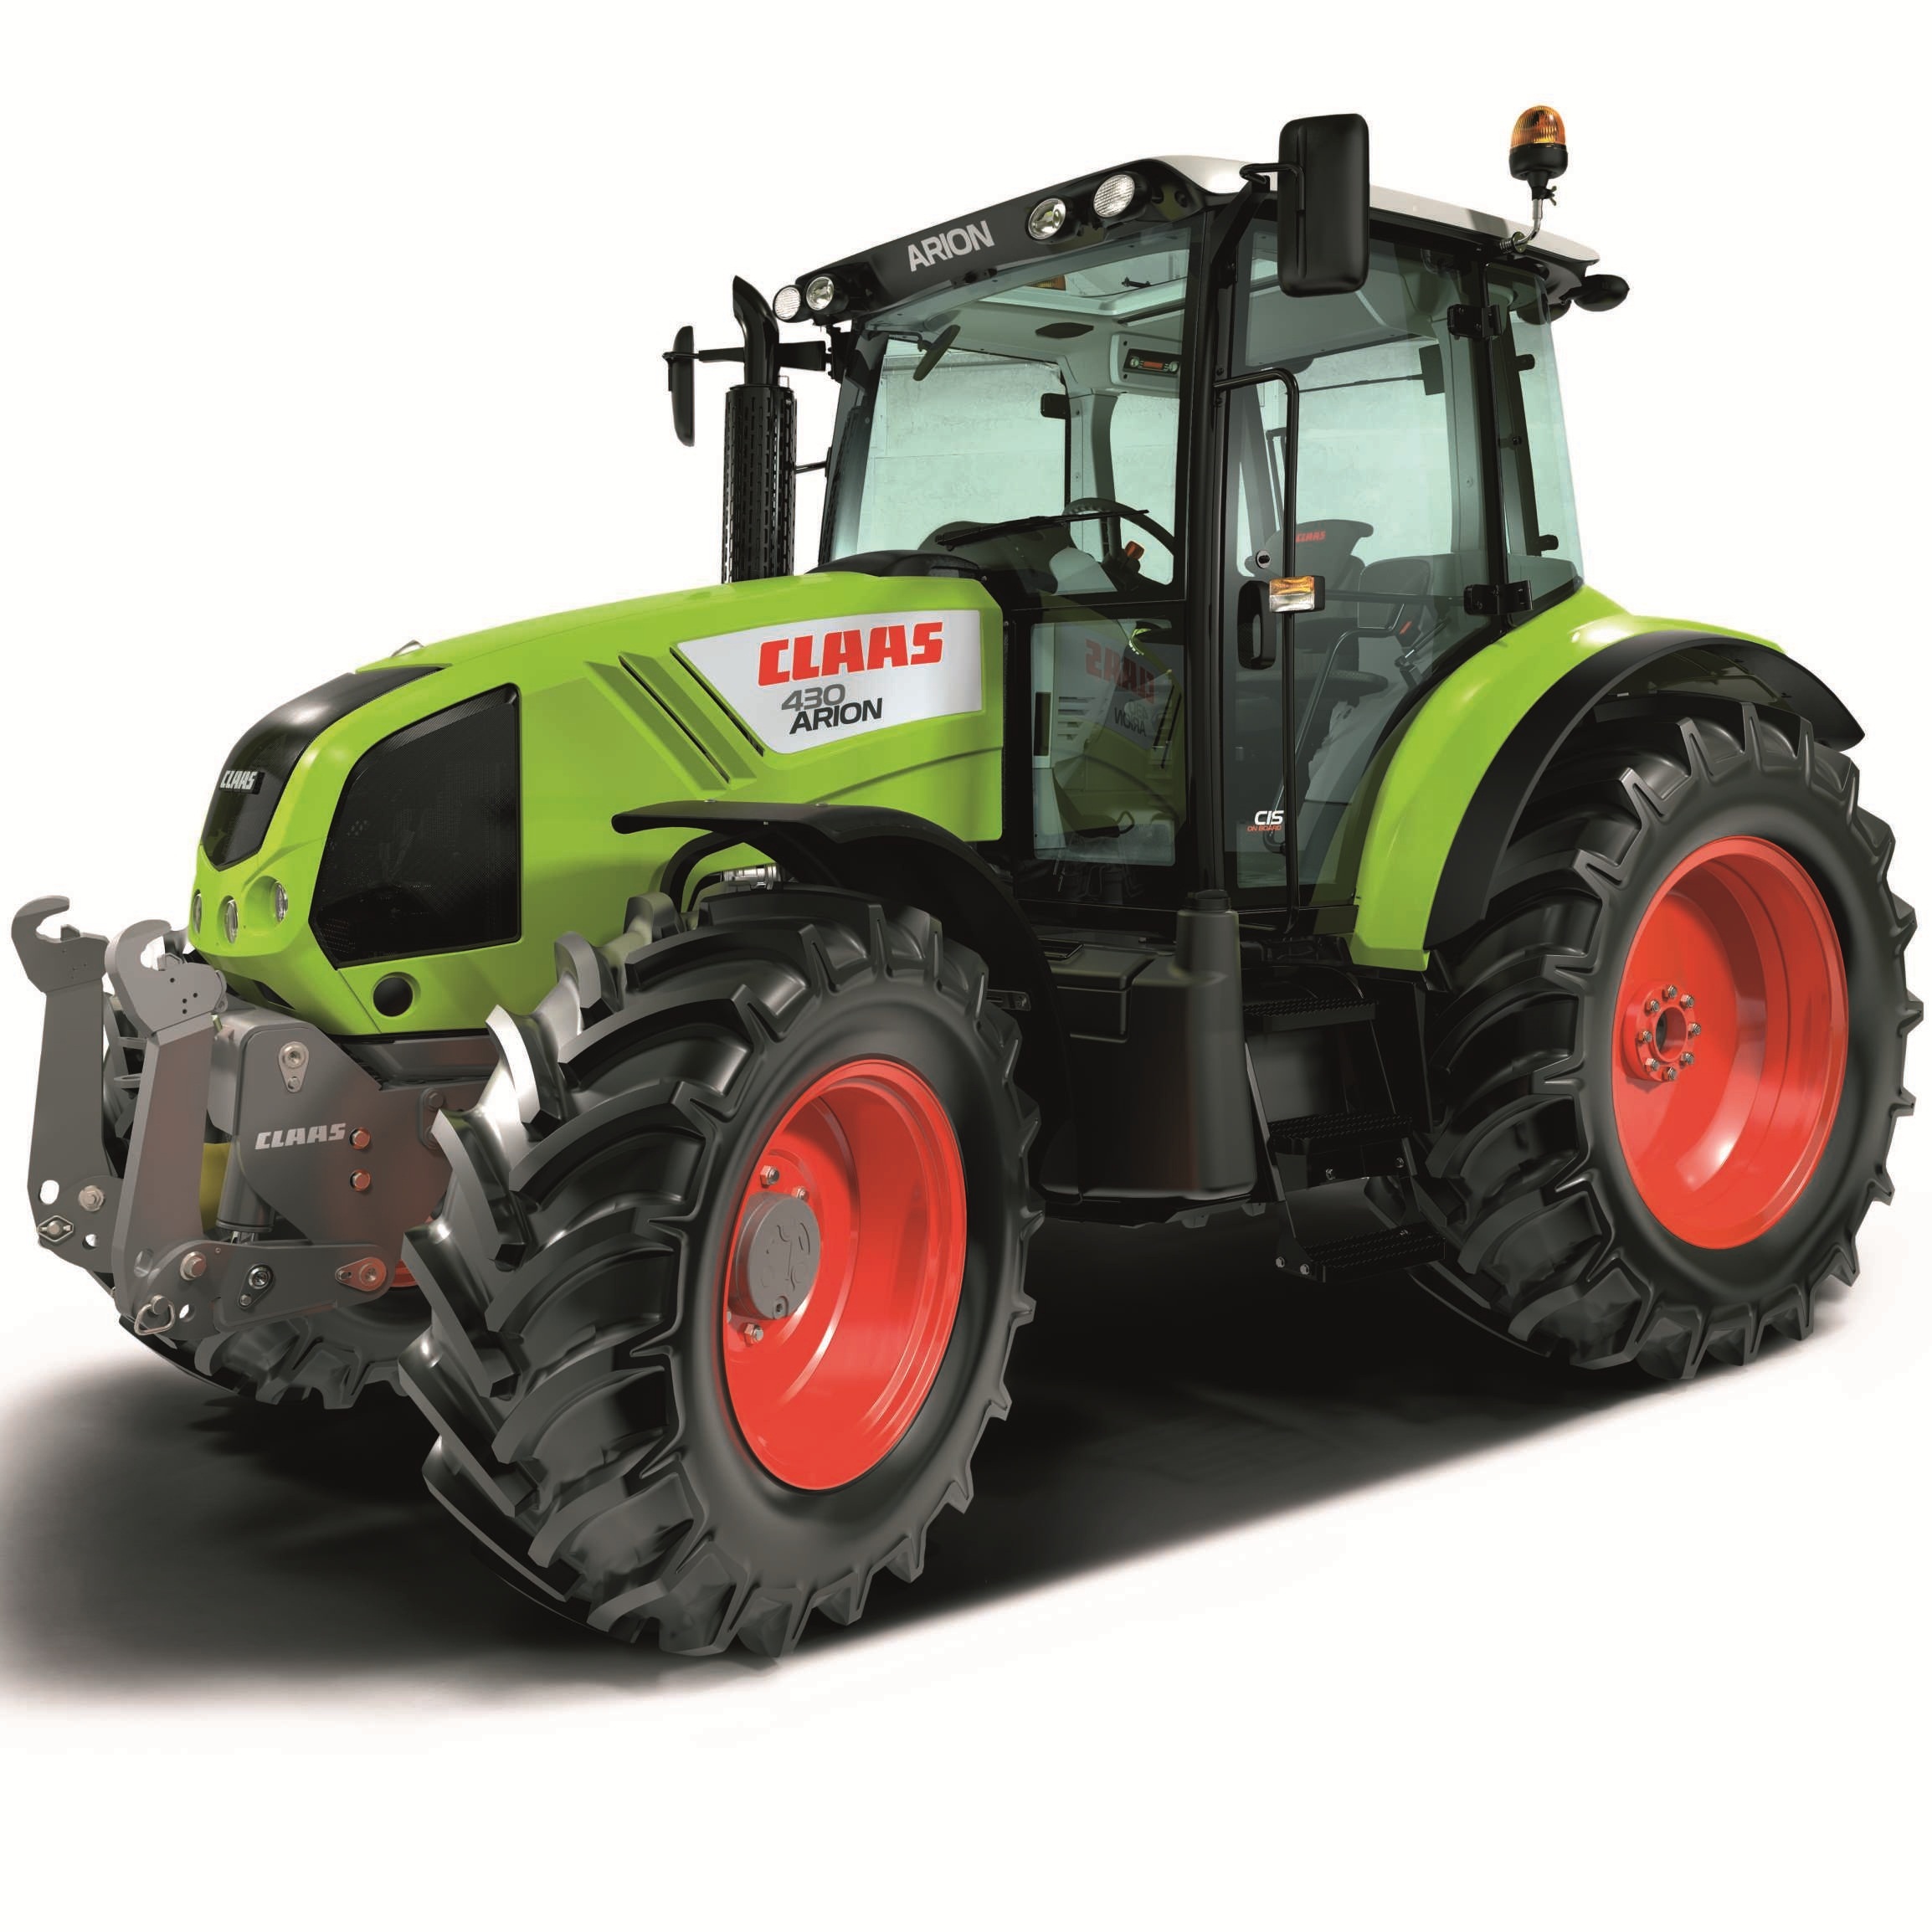 Fichiers Tuning Haute Qualité Claas Tractor Arion 420 4-4525 CR JD i-EGR 105hp